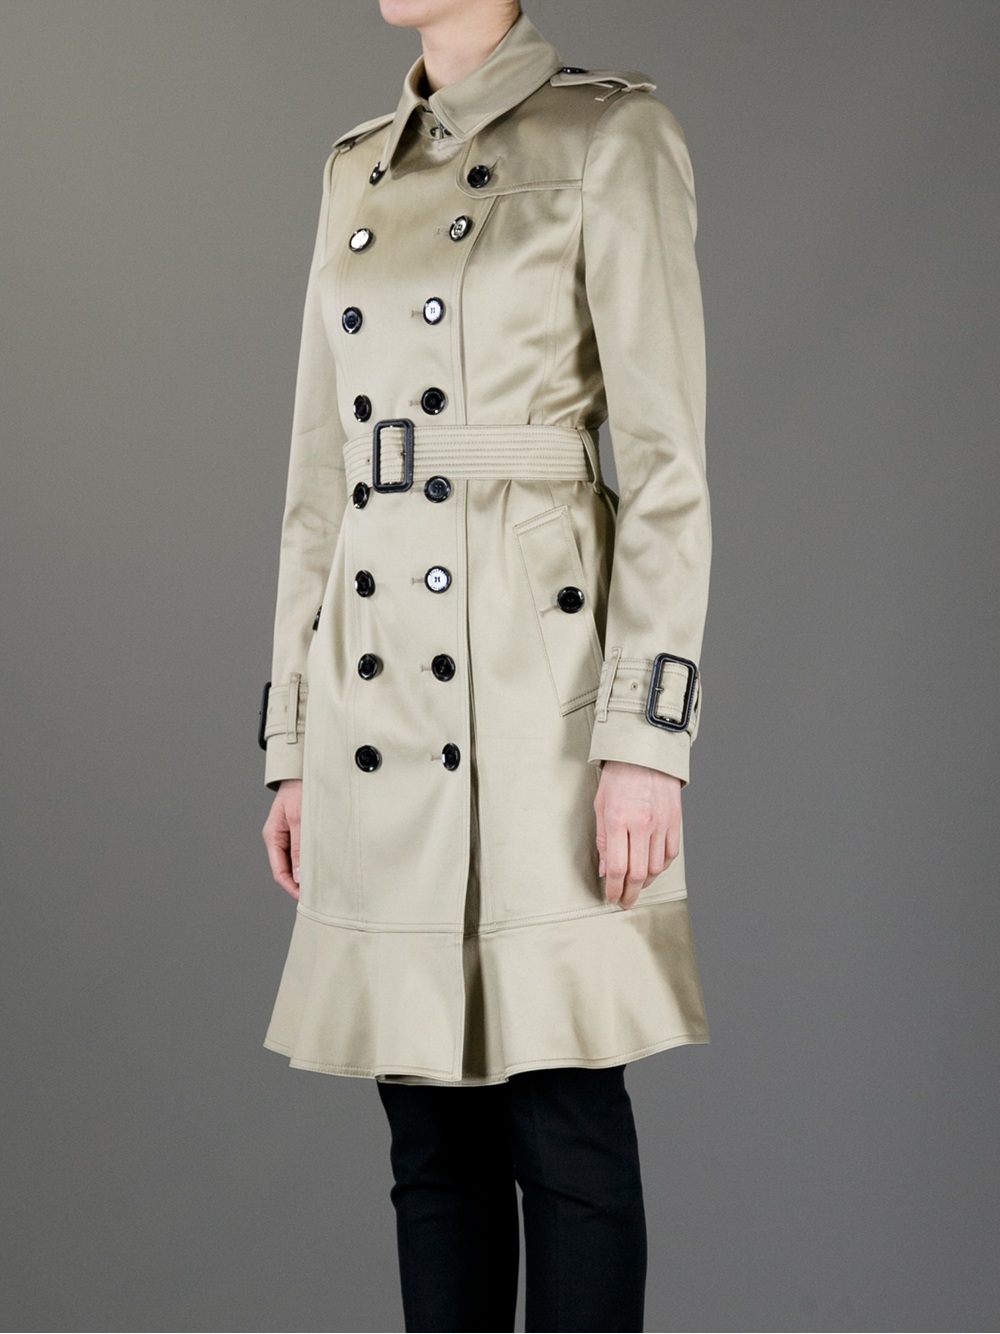 Lyst - Burberry Brit Frill Hem Trench Coat in Natural